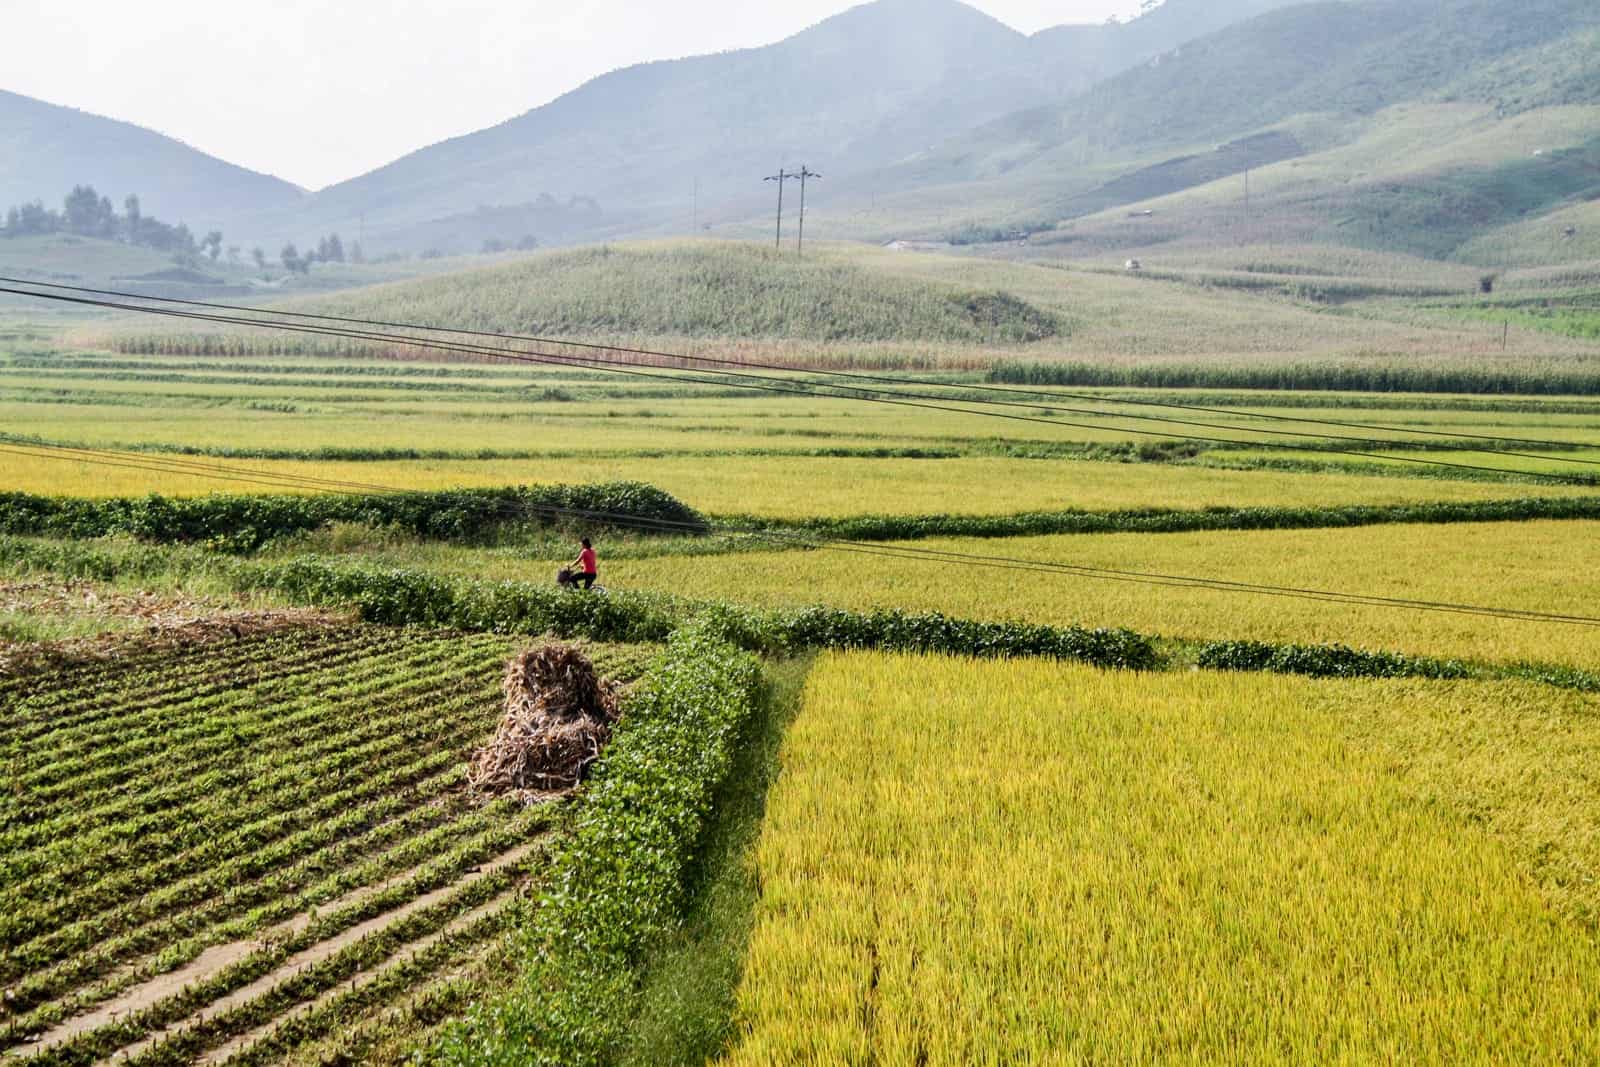 The countryside in North Korea, which tourists get to see on a tour